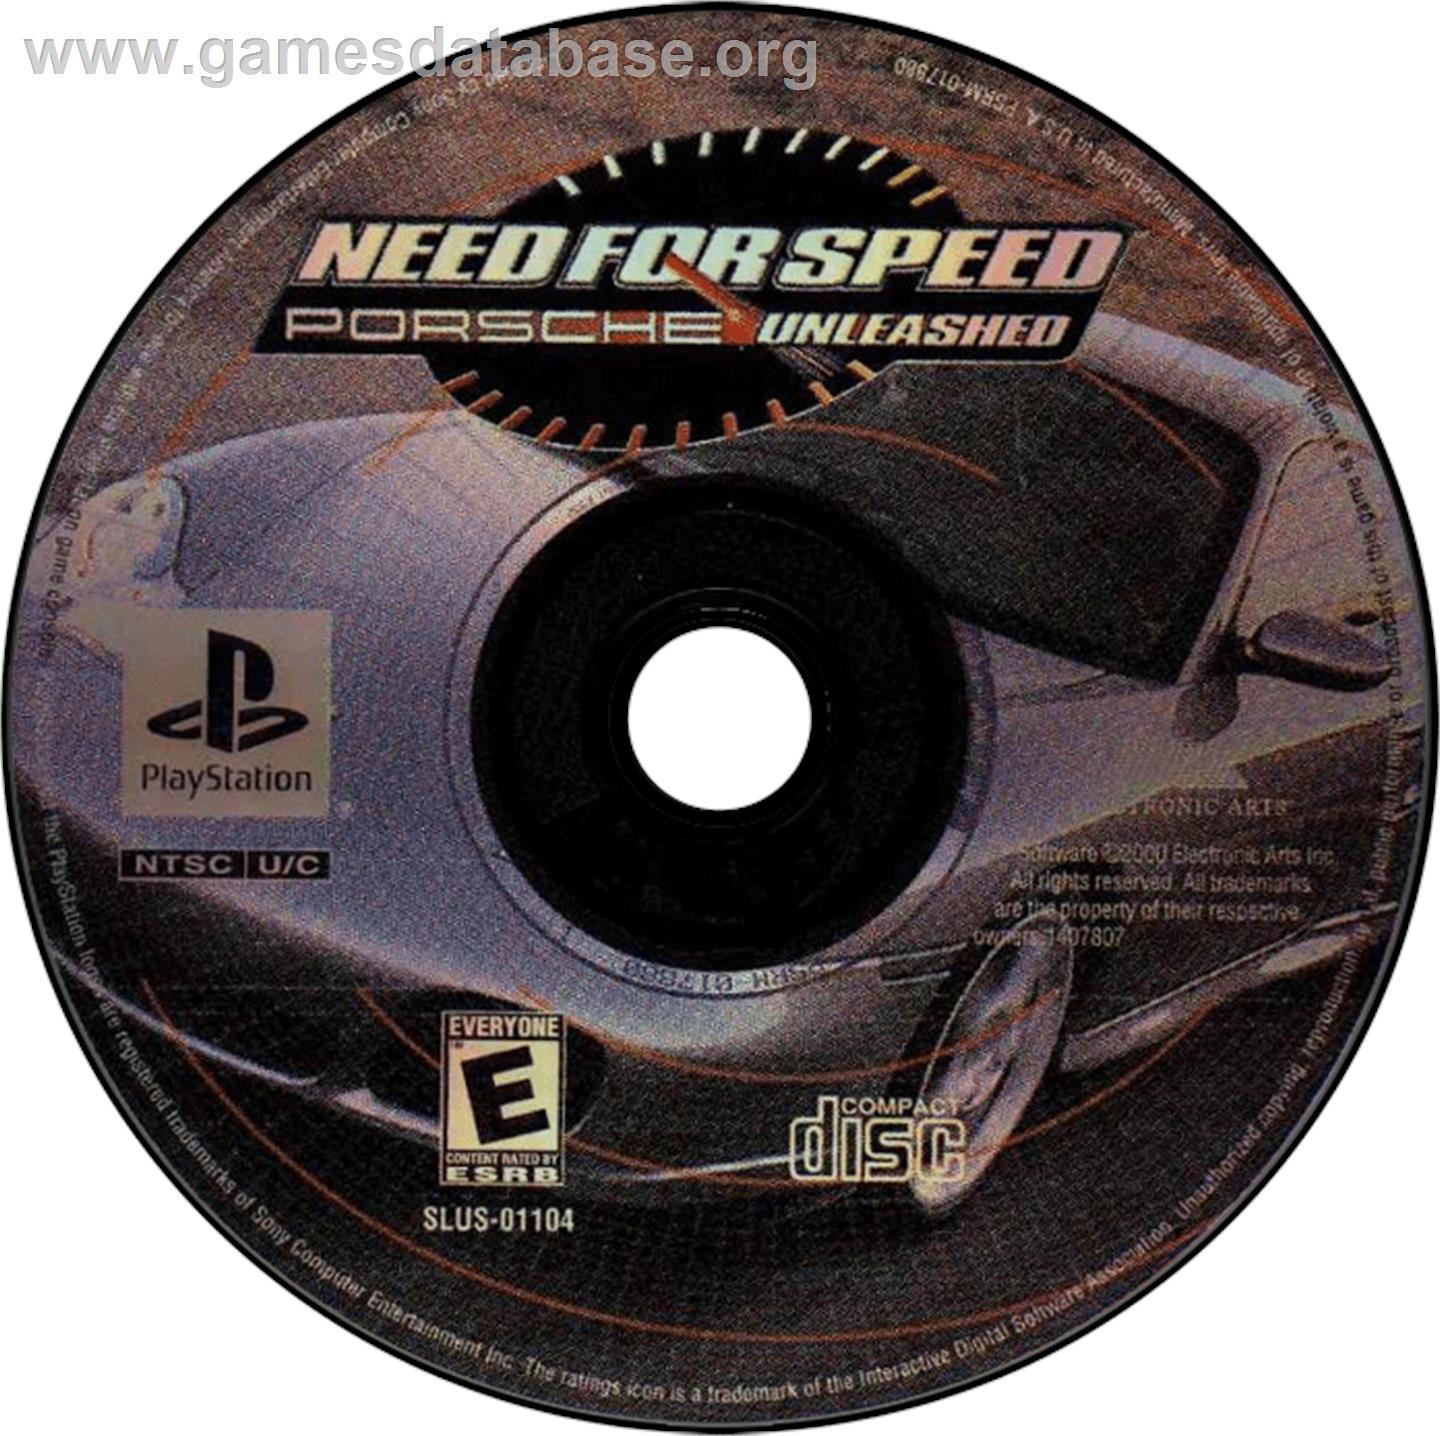 Need for Speed: Porsche Unleashed - Sony Playstation - Artwork - Disc